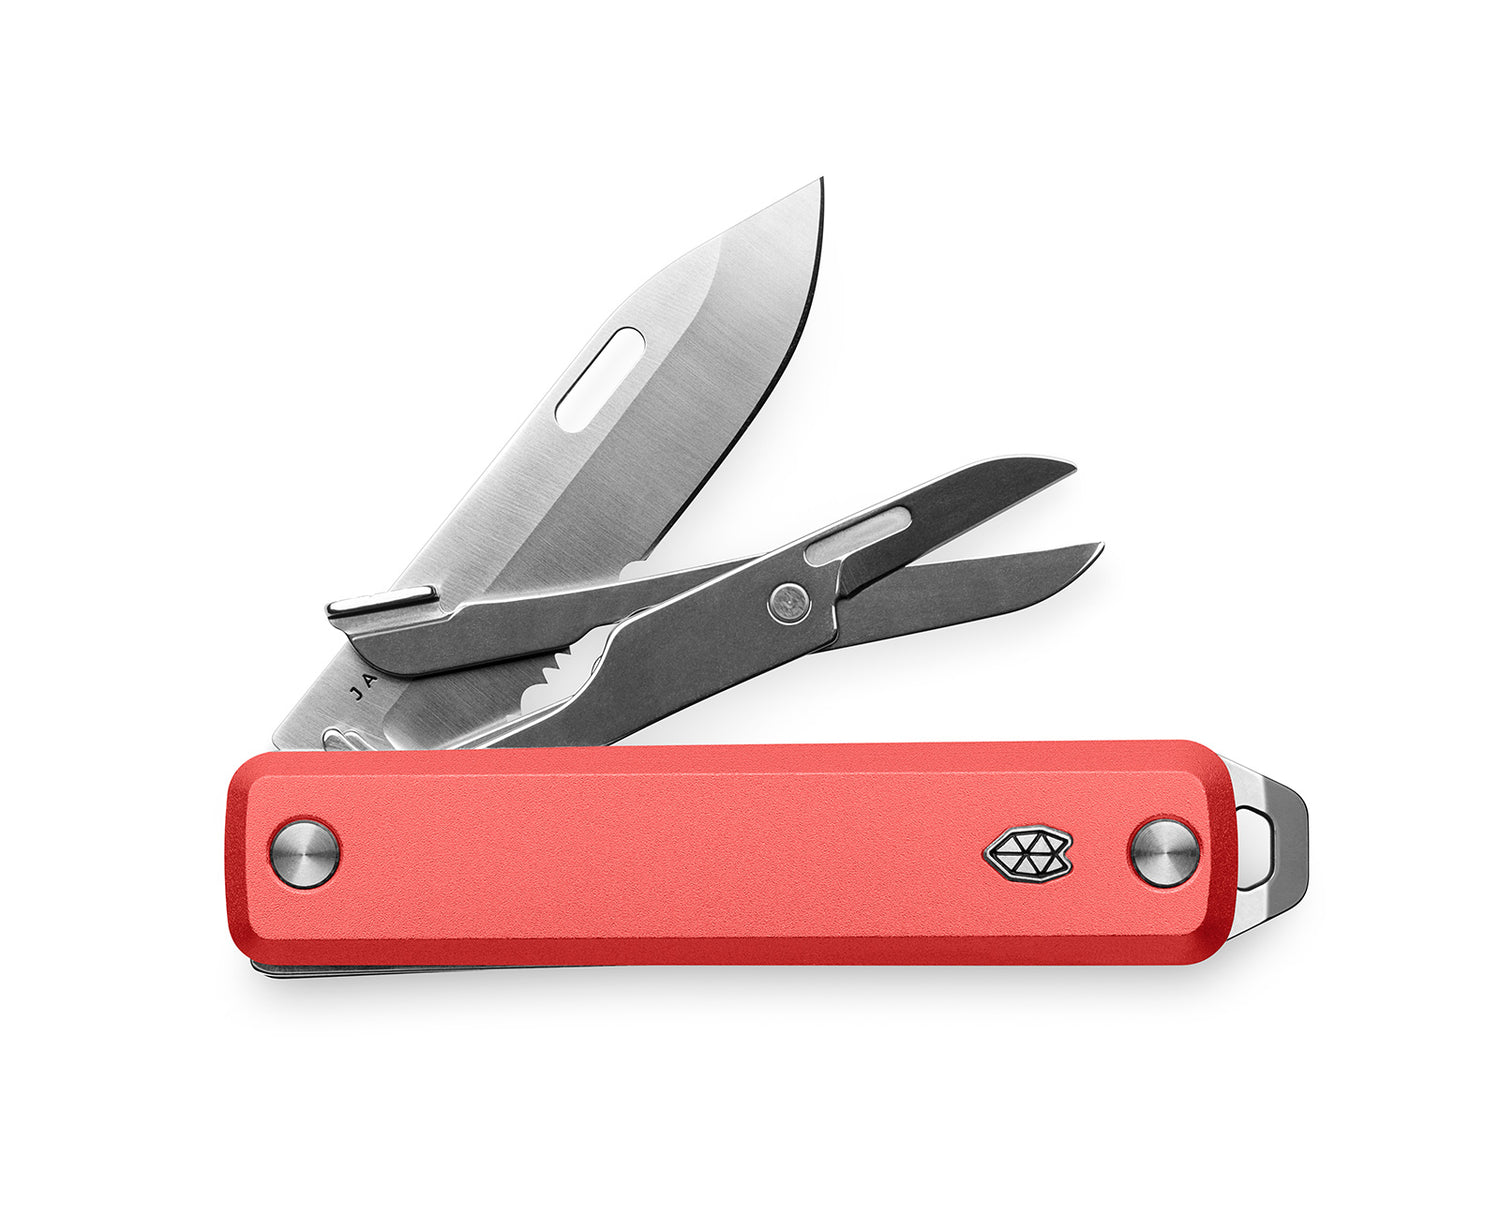 The Ellis multi-tool knife with coral handle.